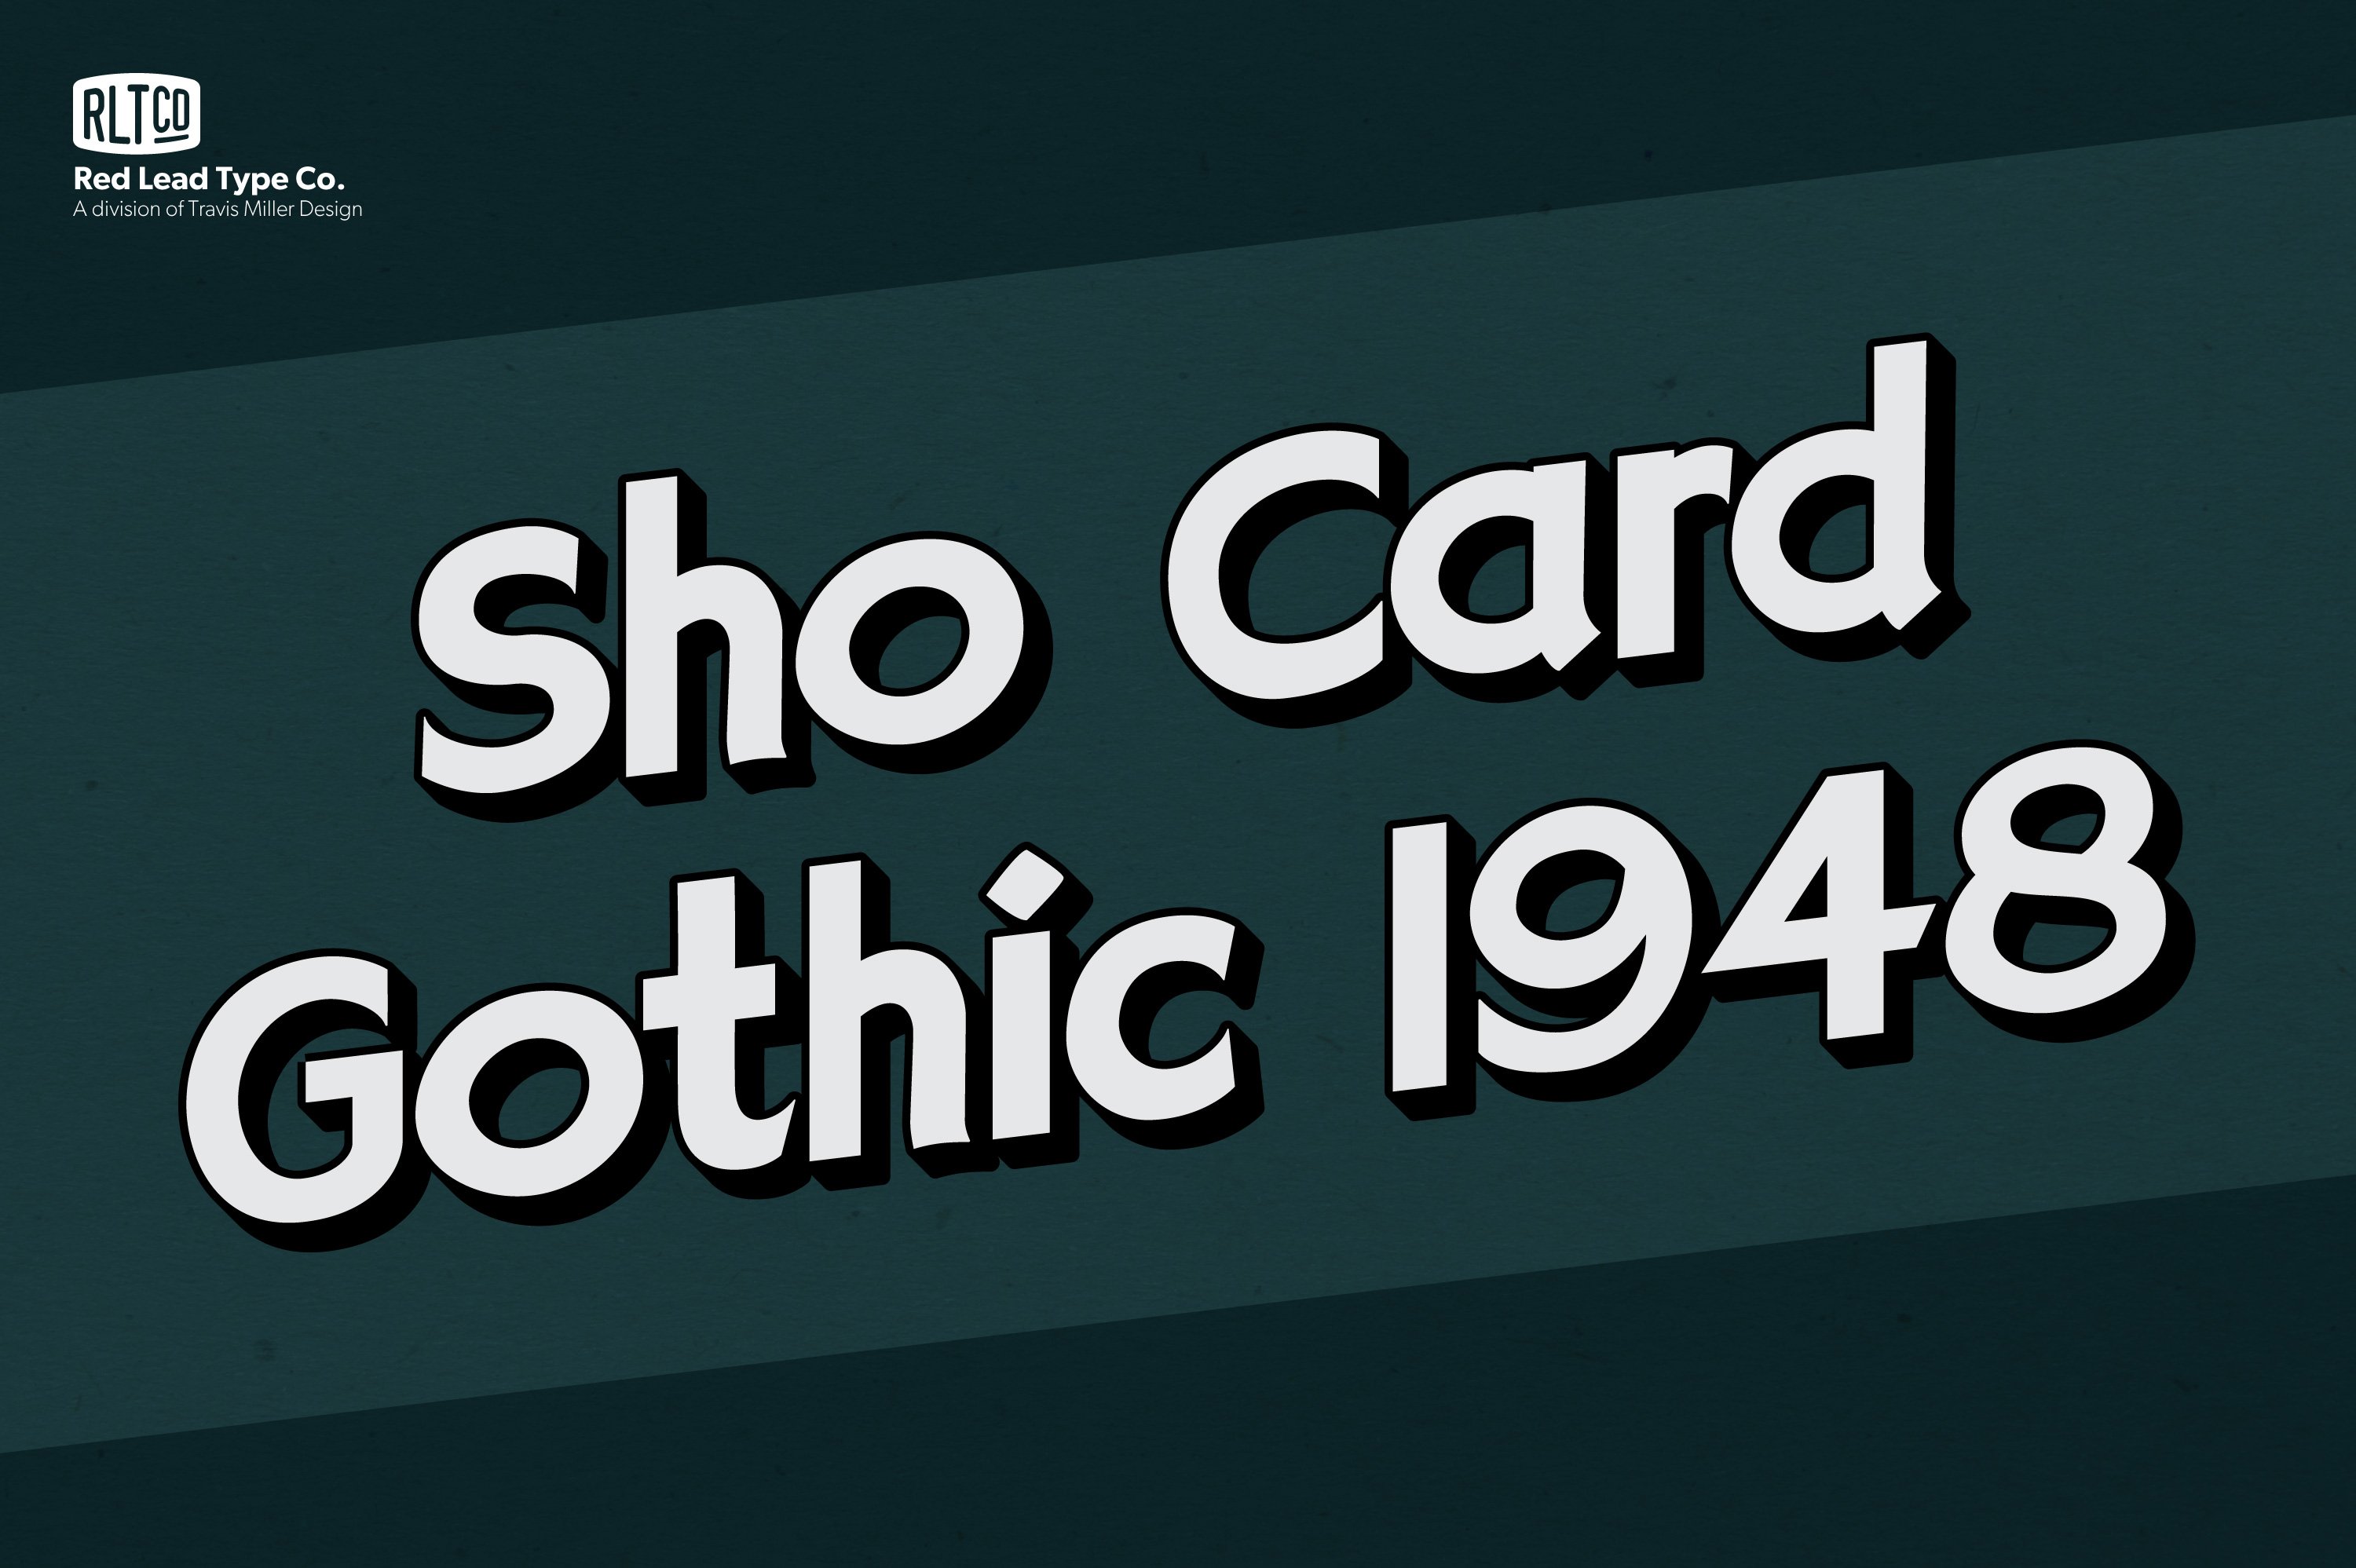 Sho Card Gothic 1948 cover image.